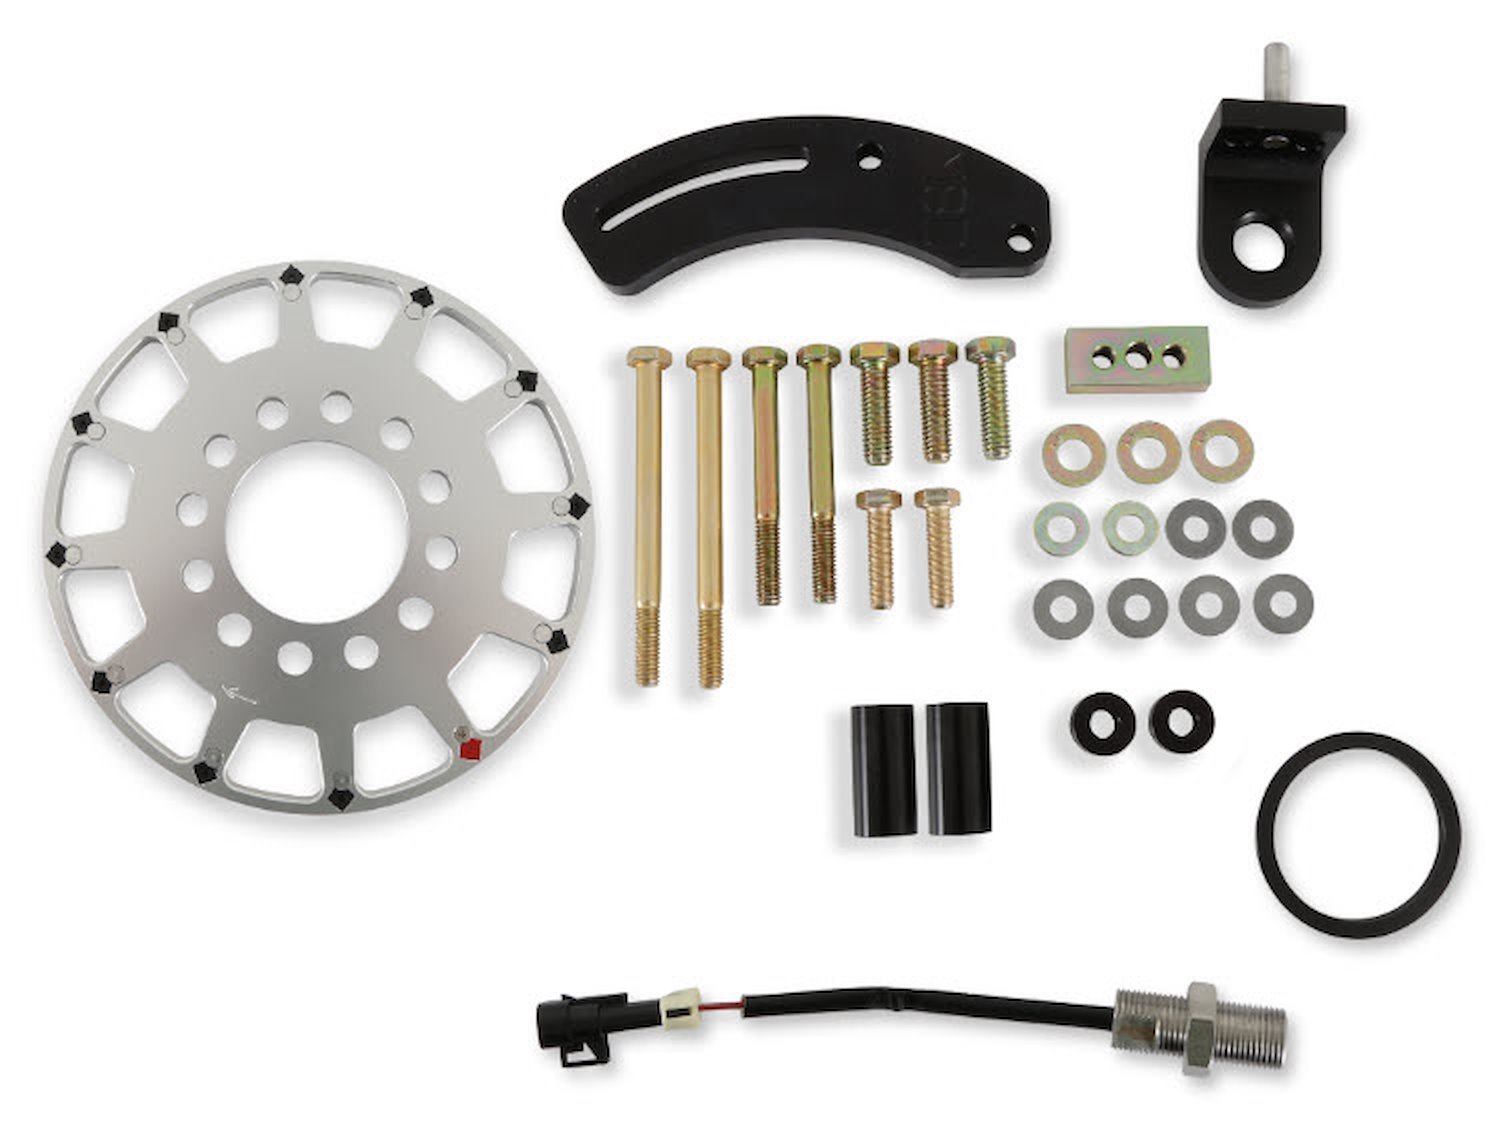 EFI Crank Trigger System for Ford Small Block